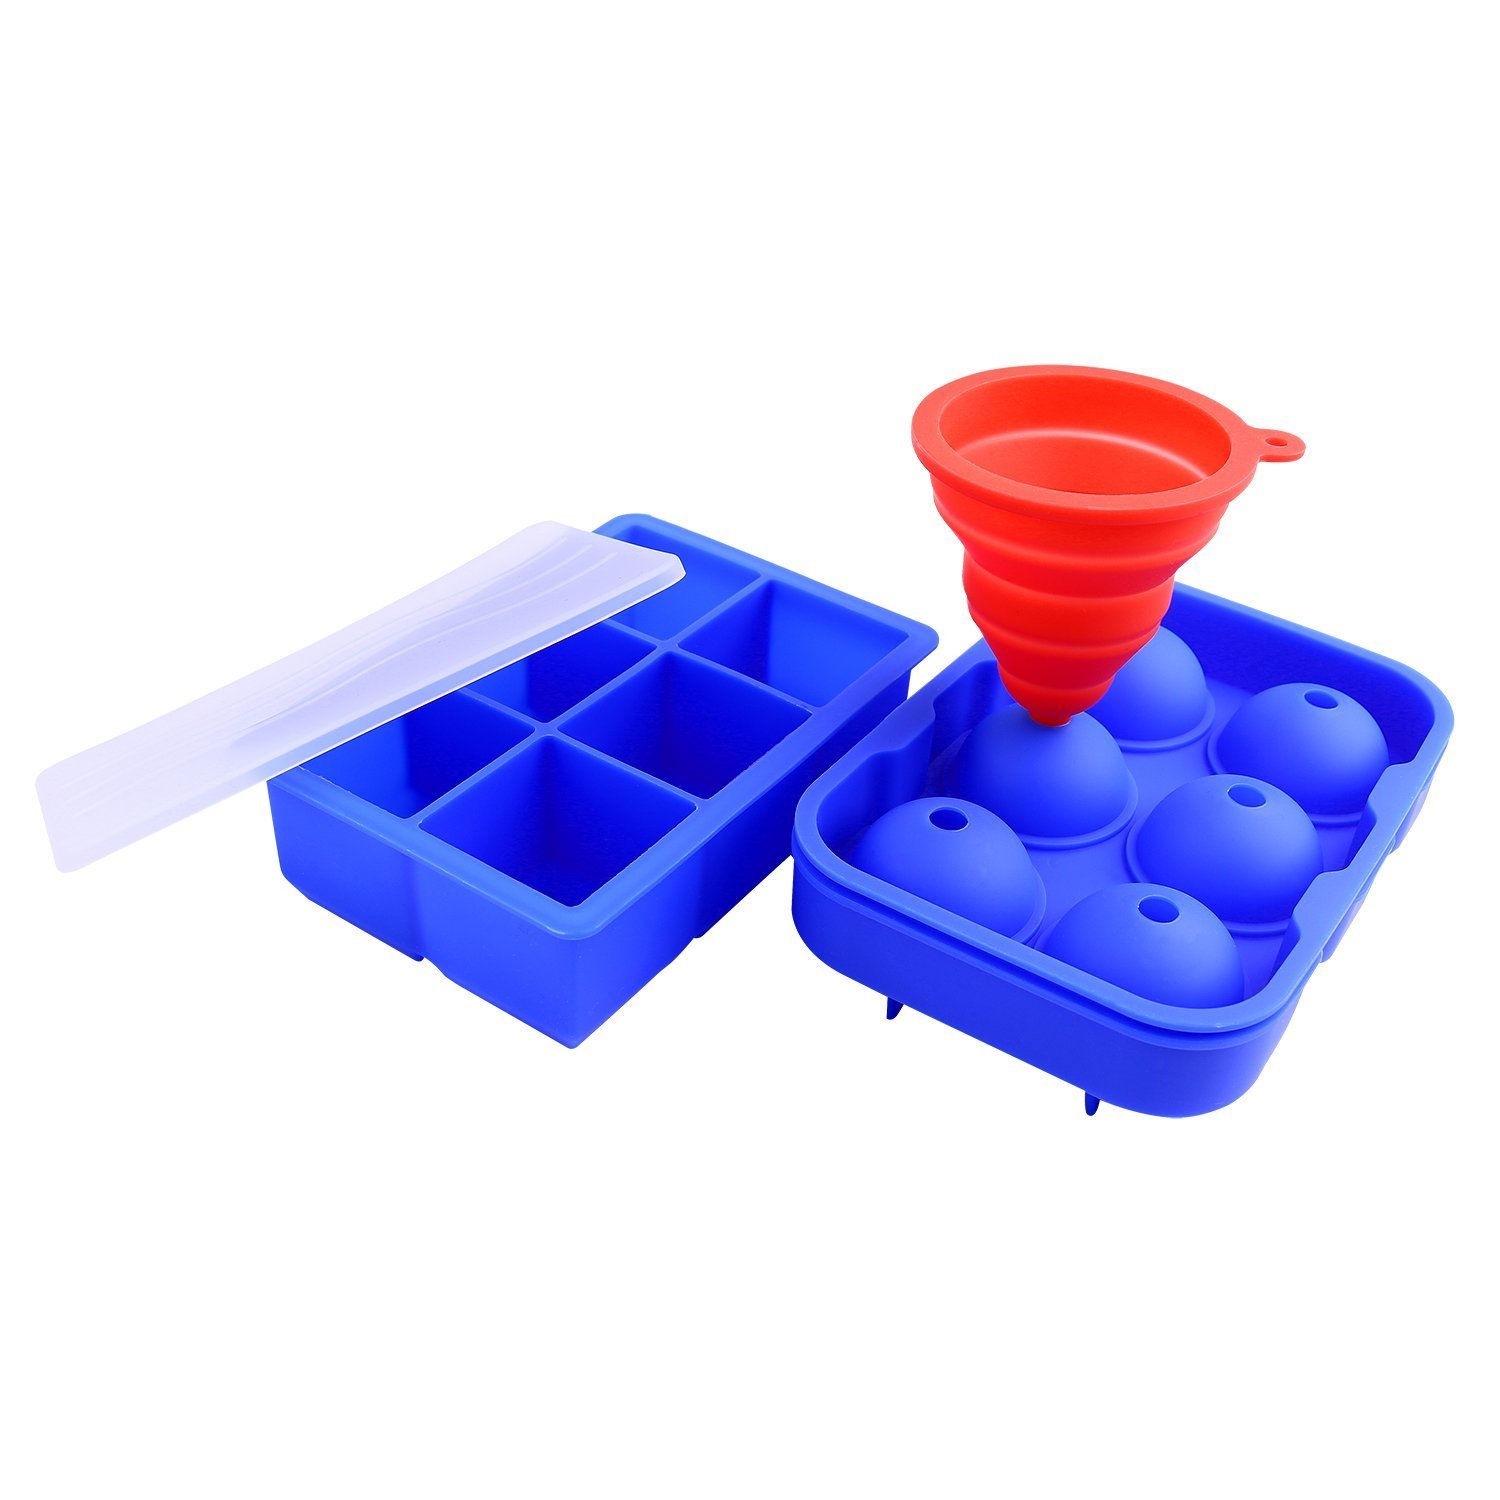 Silicone Sphere Whisky Ice Ball Mould Maker Met Opvouwbare Trechter